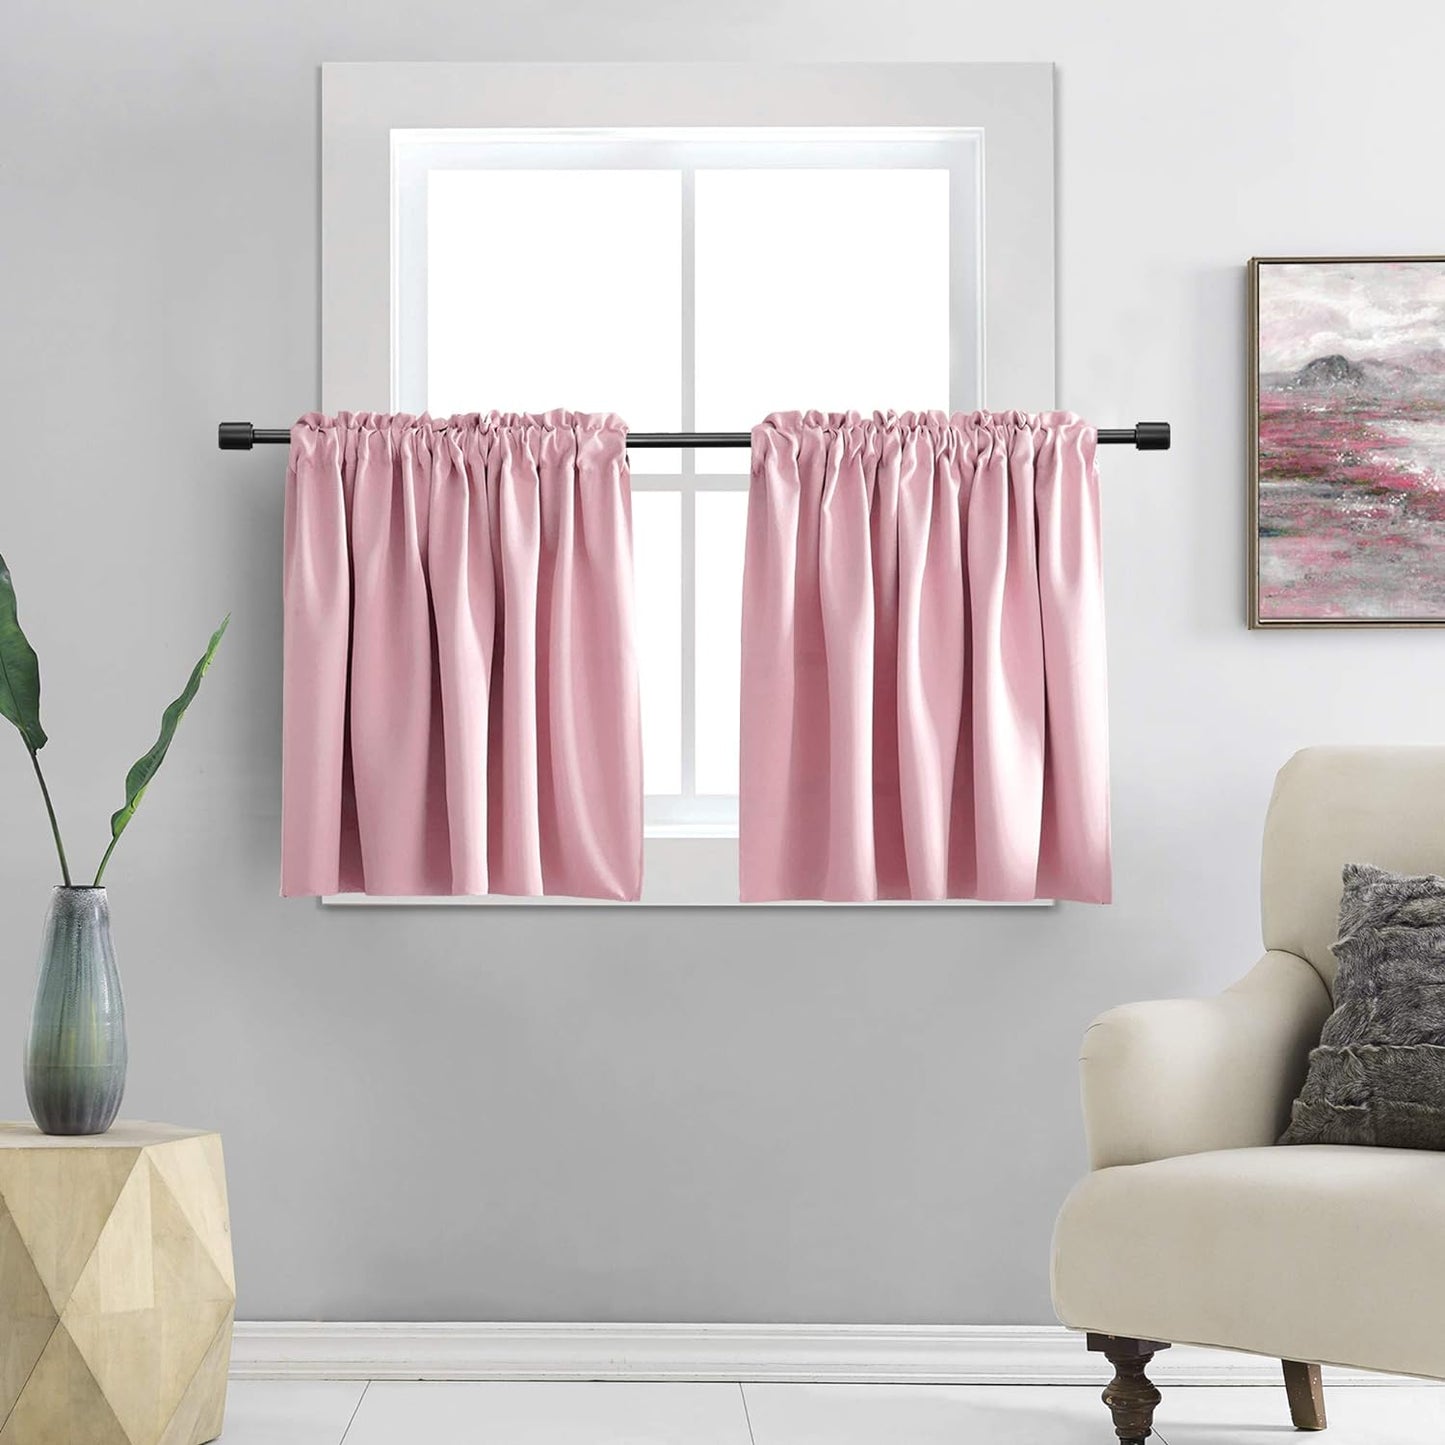 DONREN 24 Inch Length Curtains- 2 Panels Blackout Thermal Insulating Small Curtain Tiers for Bathroom with Rod Pocket (Black,42 Inch Width)  DONREN Pink 30" X 30" 